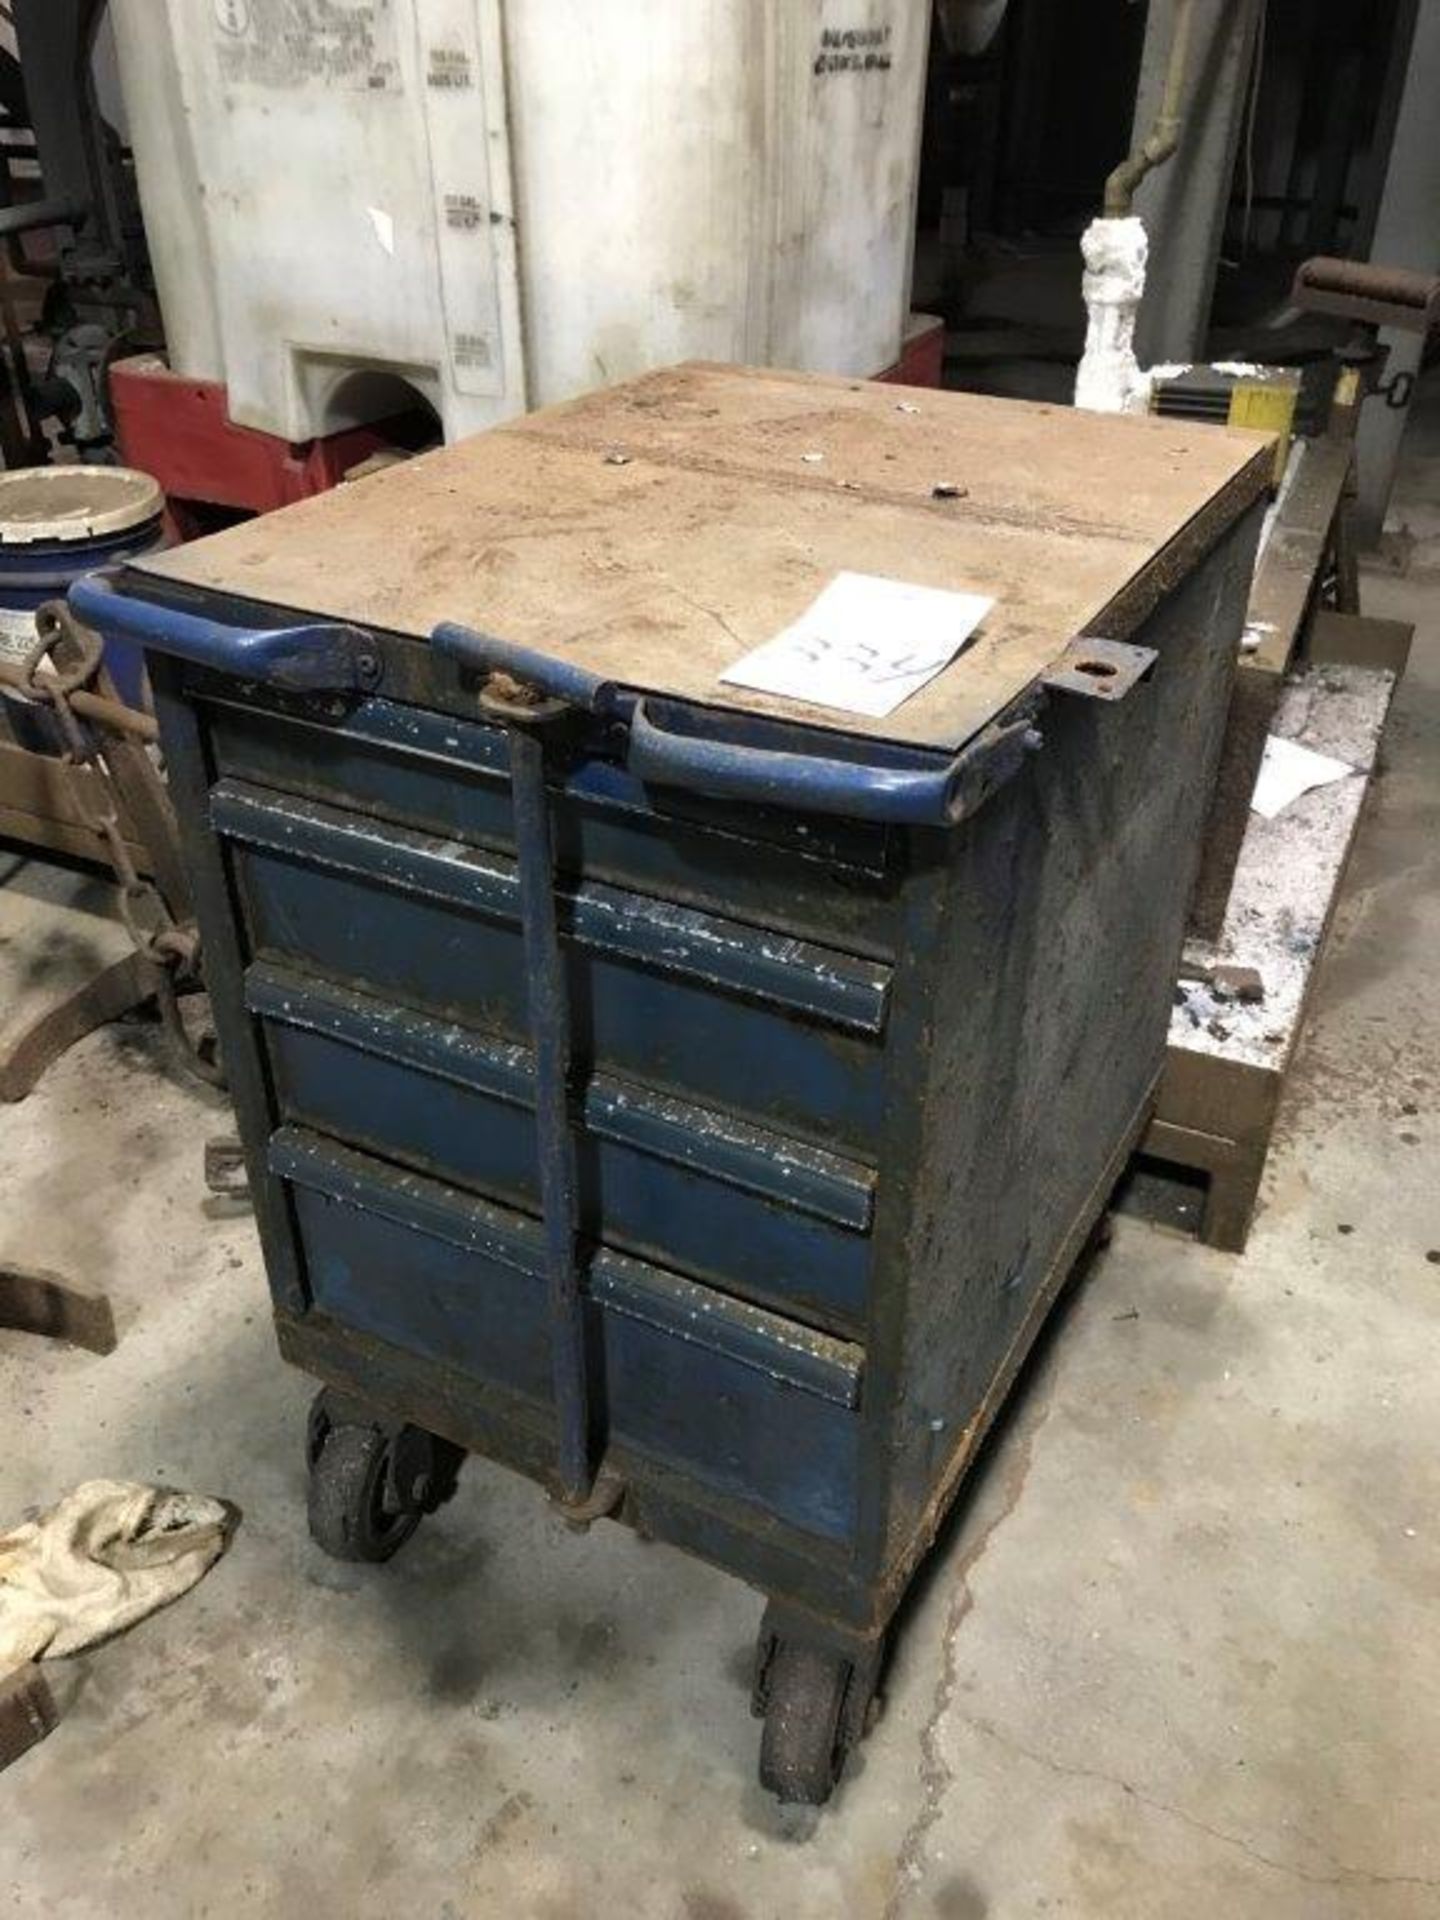 Mobile 6-Drawer Tool Chest, 22" x 22" x 28" with Misc. Content (Loc. Air Cleaner Room)